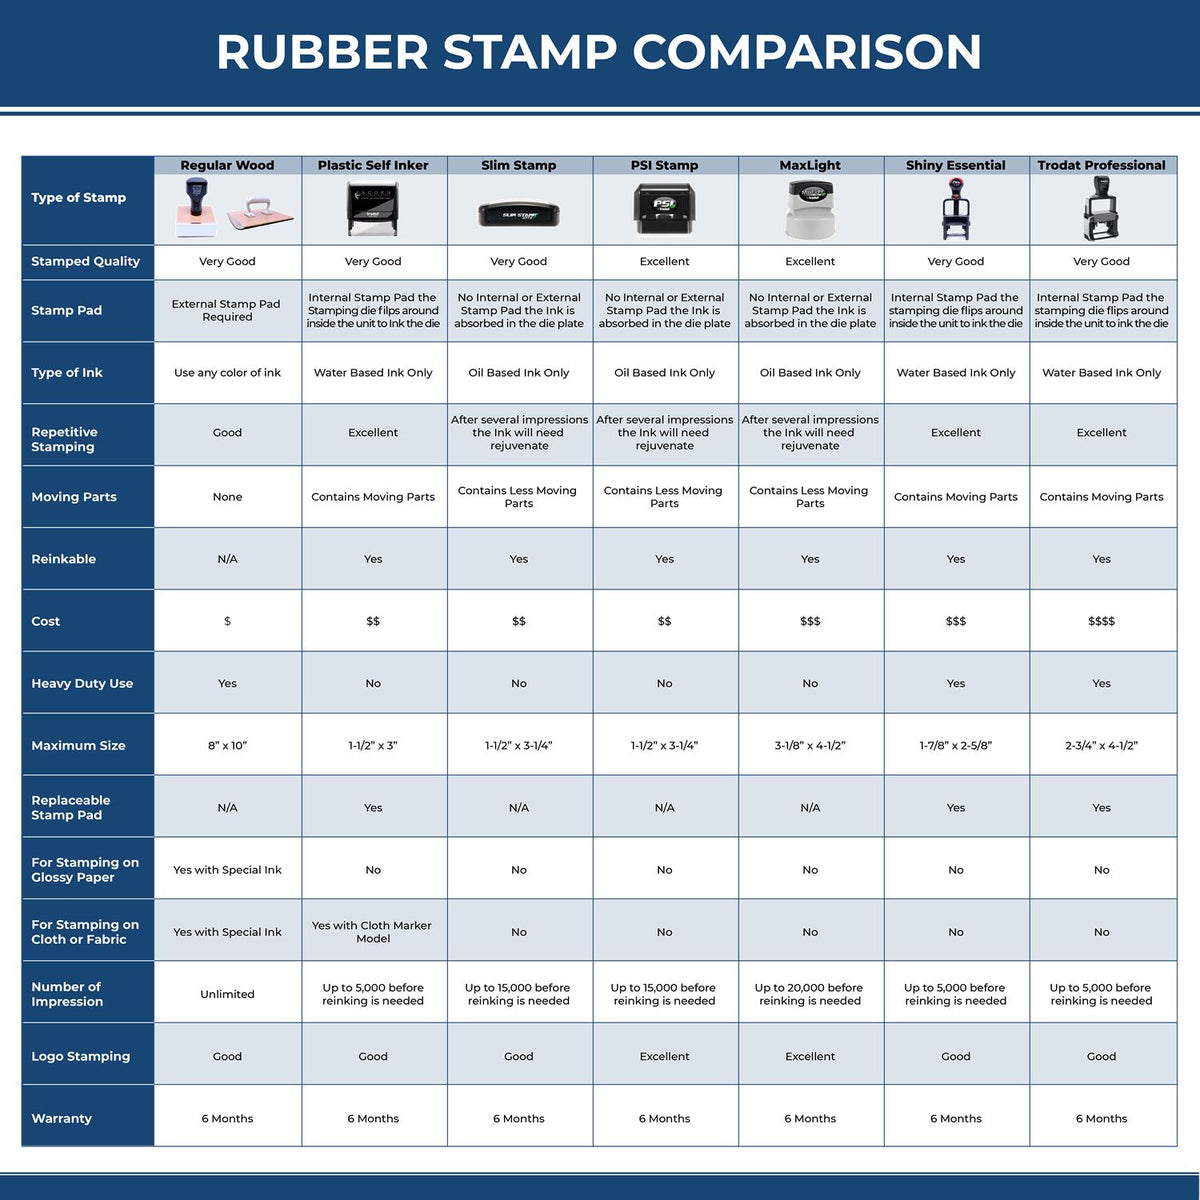 A comparison chart for the different types of mount models available for the Premium MaxLight Pre-Inked Ohio Engineering Stamp.